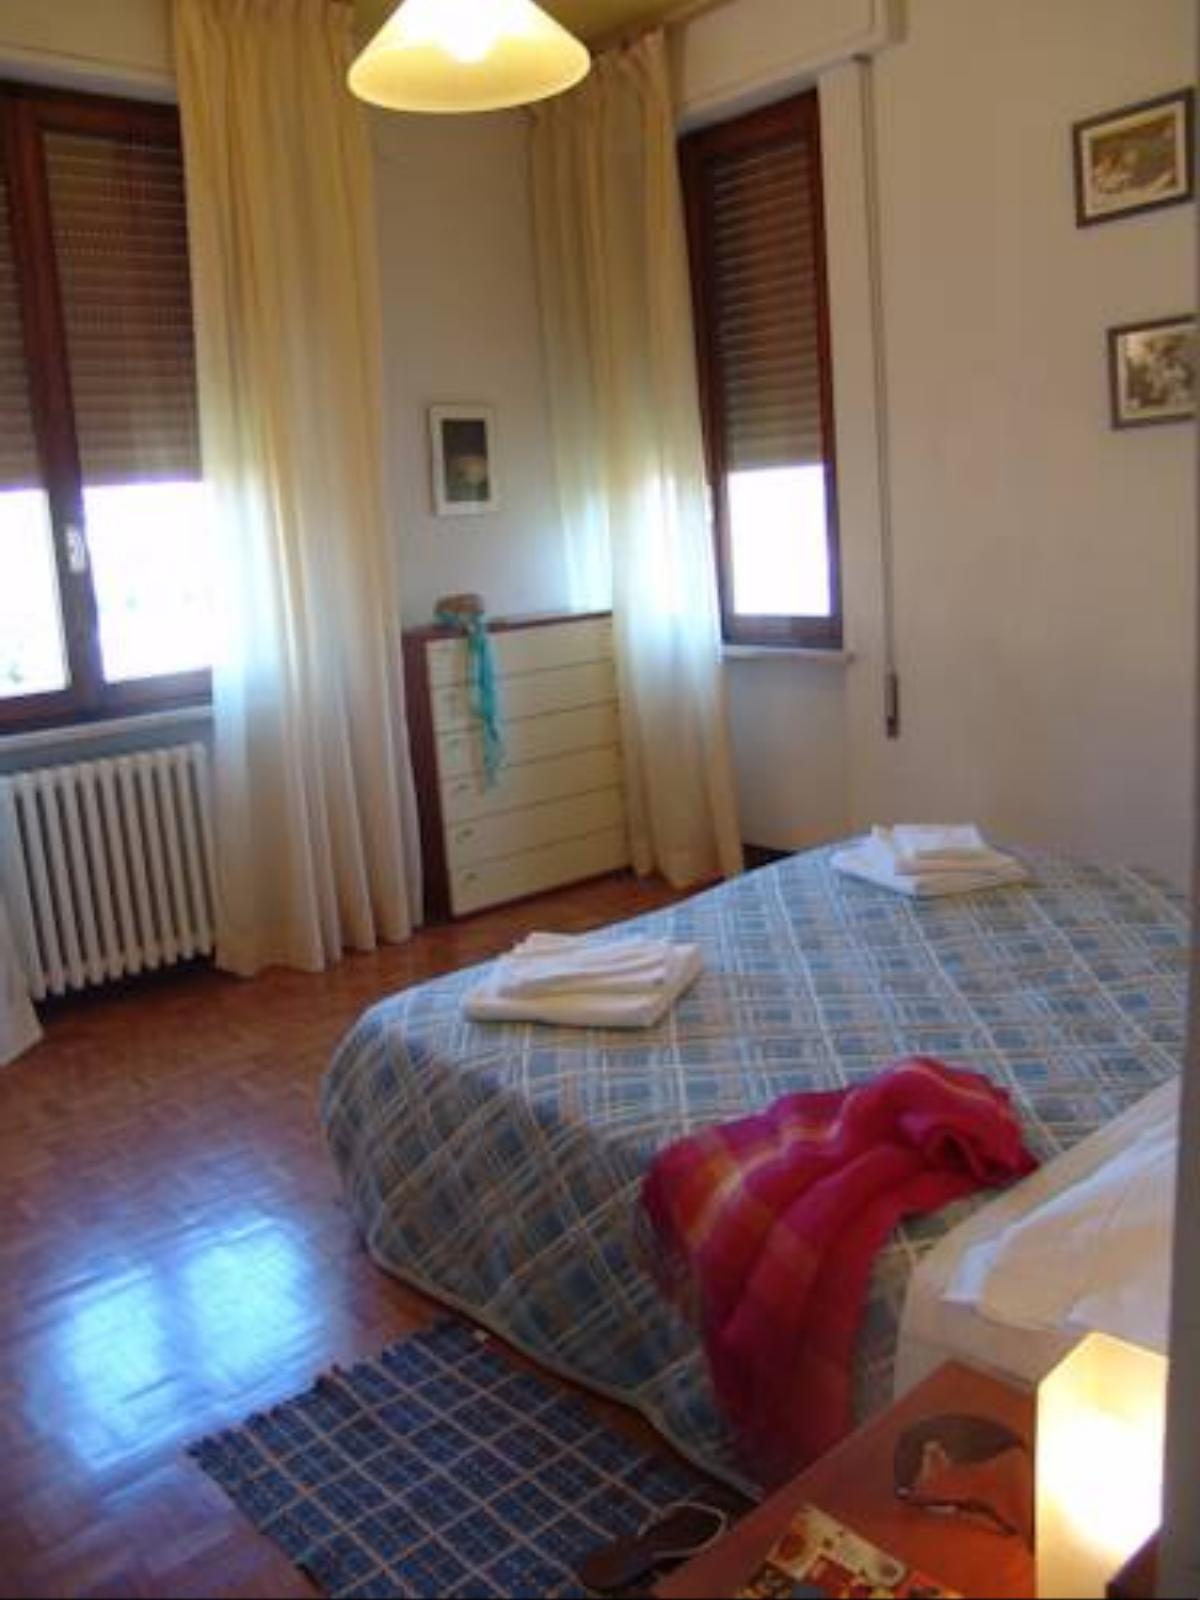 Green Apartment Hotel Florence Italy